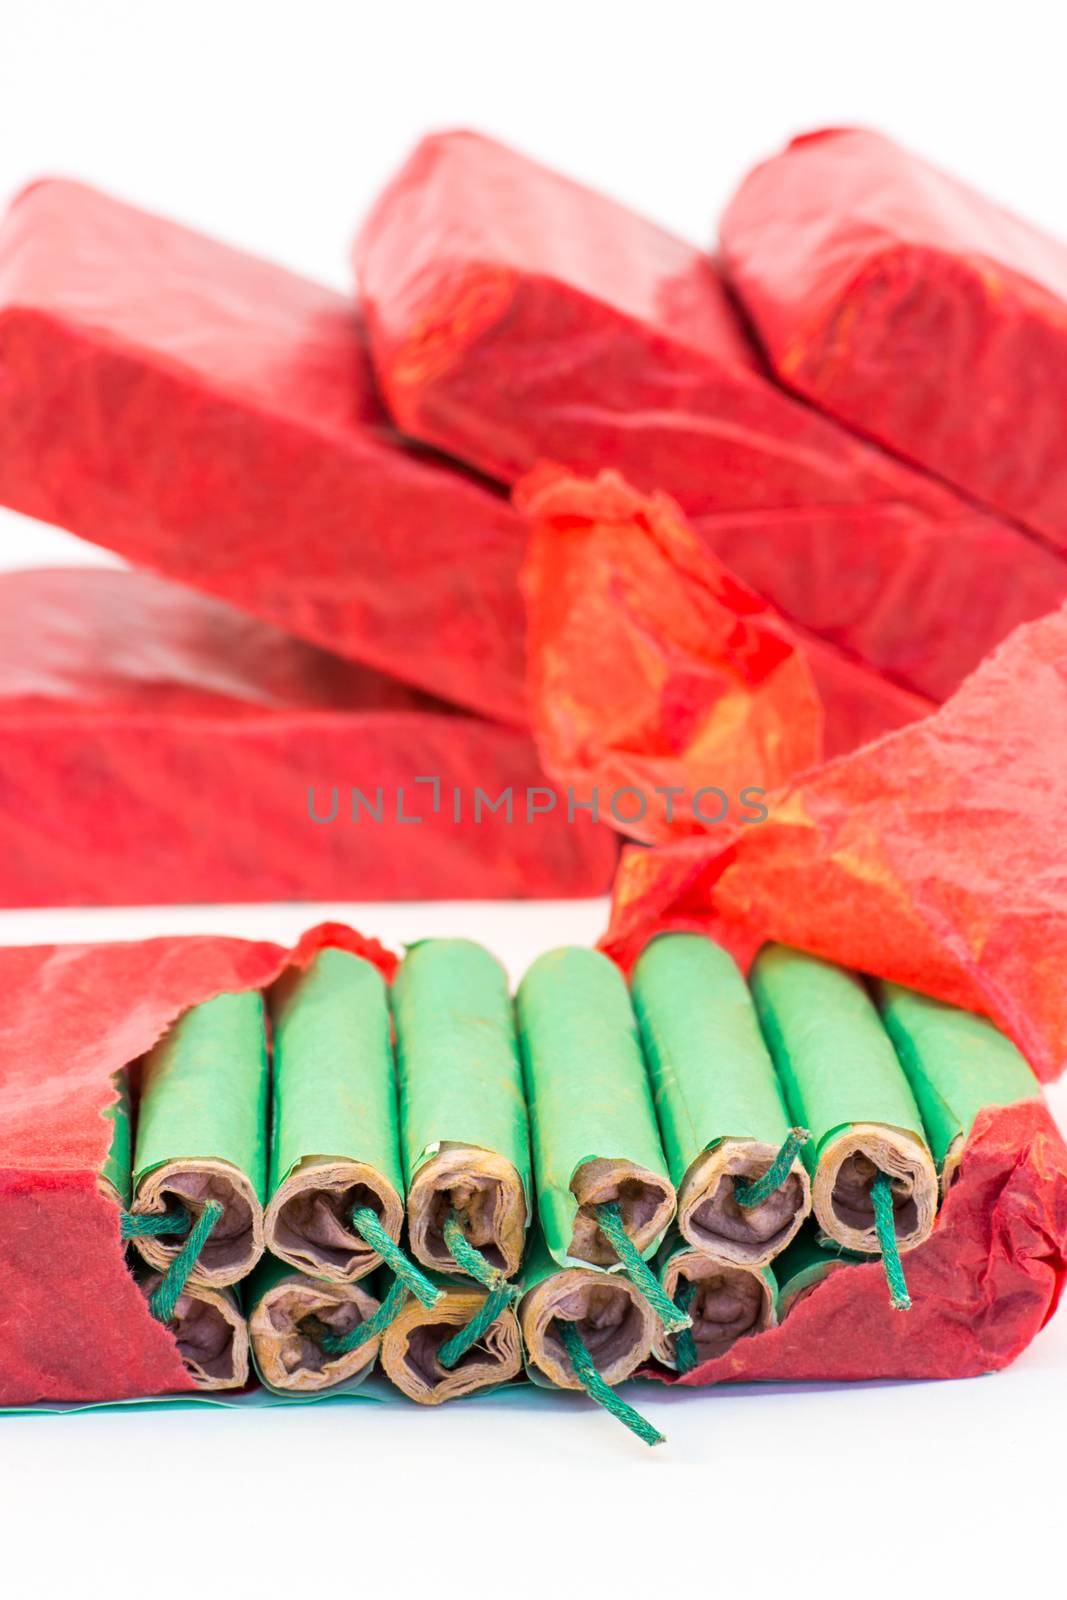 Red packets with green firecrackers by BenSchonewille